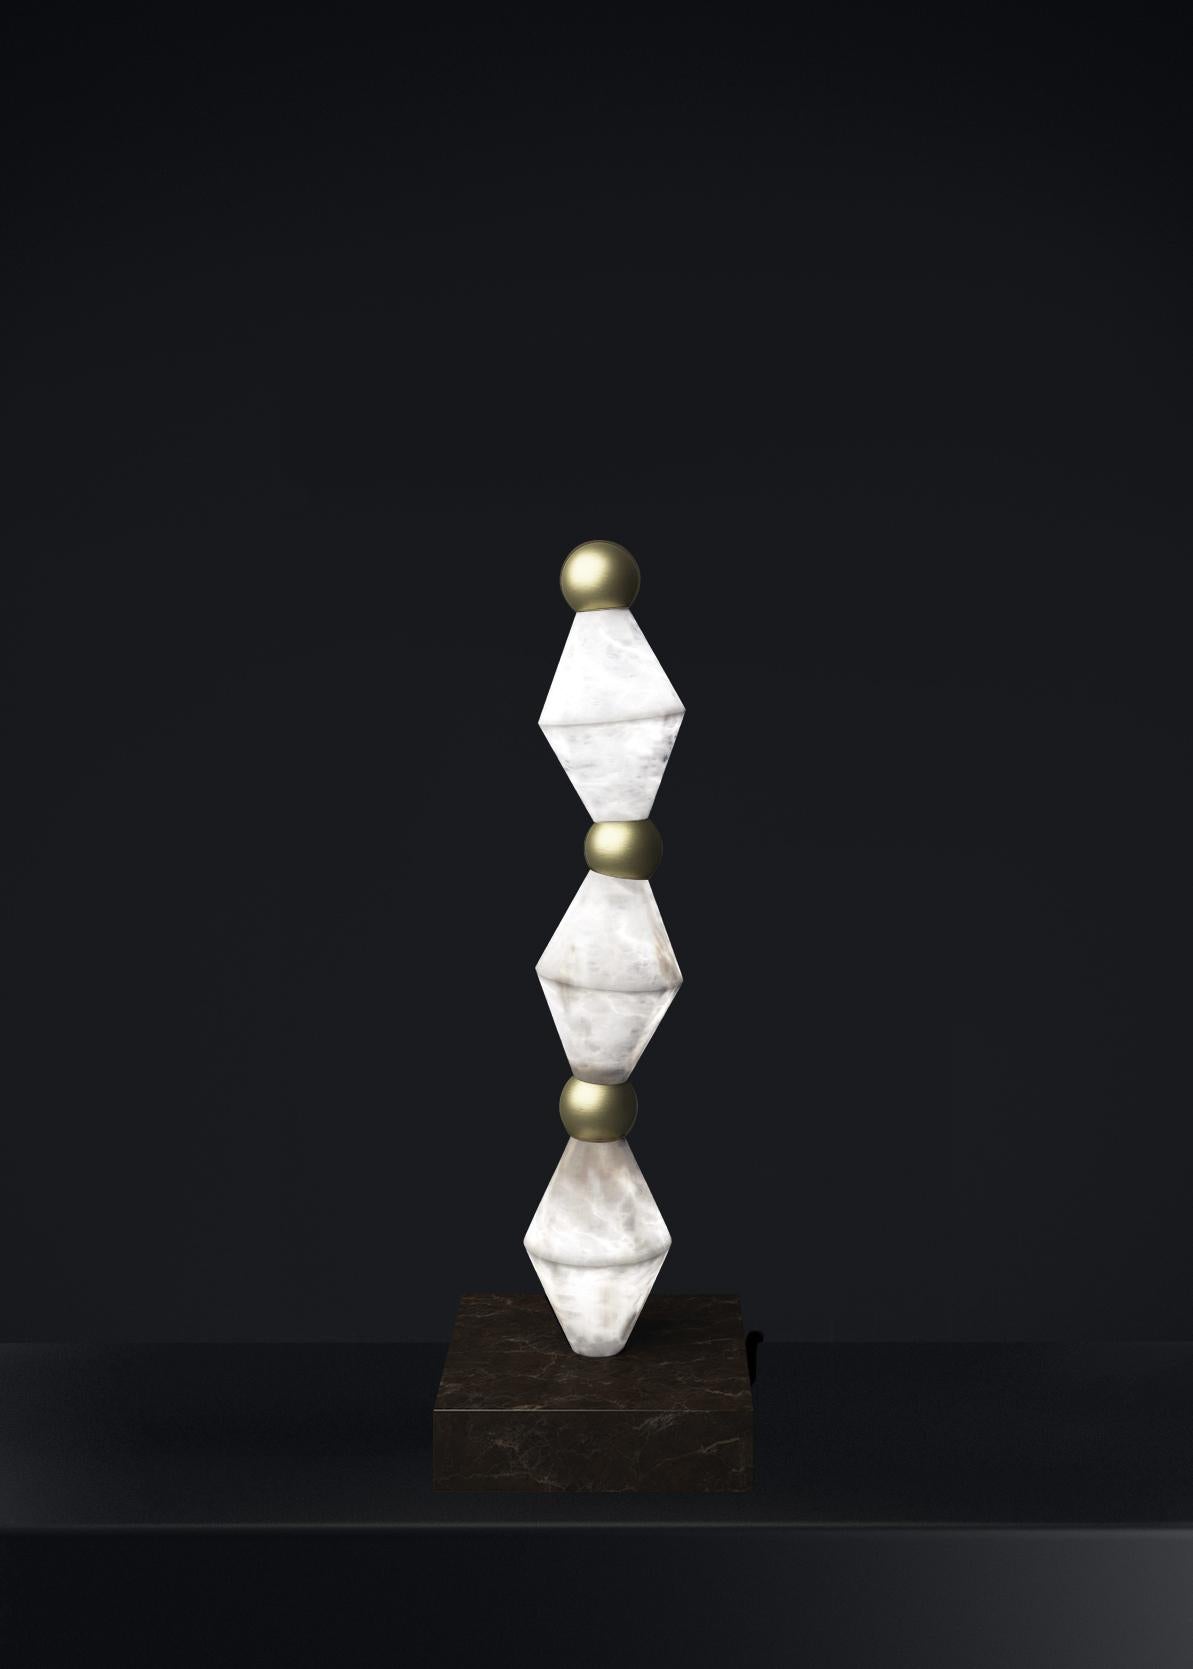 Chronos Brushed Brass Table Lamp by Alabastro Italiano
Dimensions: D 15 x W 15 x H 71,5 cm.
Materials: White alabaster, marble and brass.

Available in different finishes: Shiny Silver, Bronze, Brushed Brass, Ruggine of Florence, Brushed Burnished,